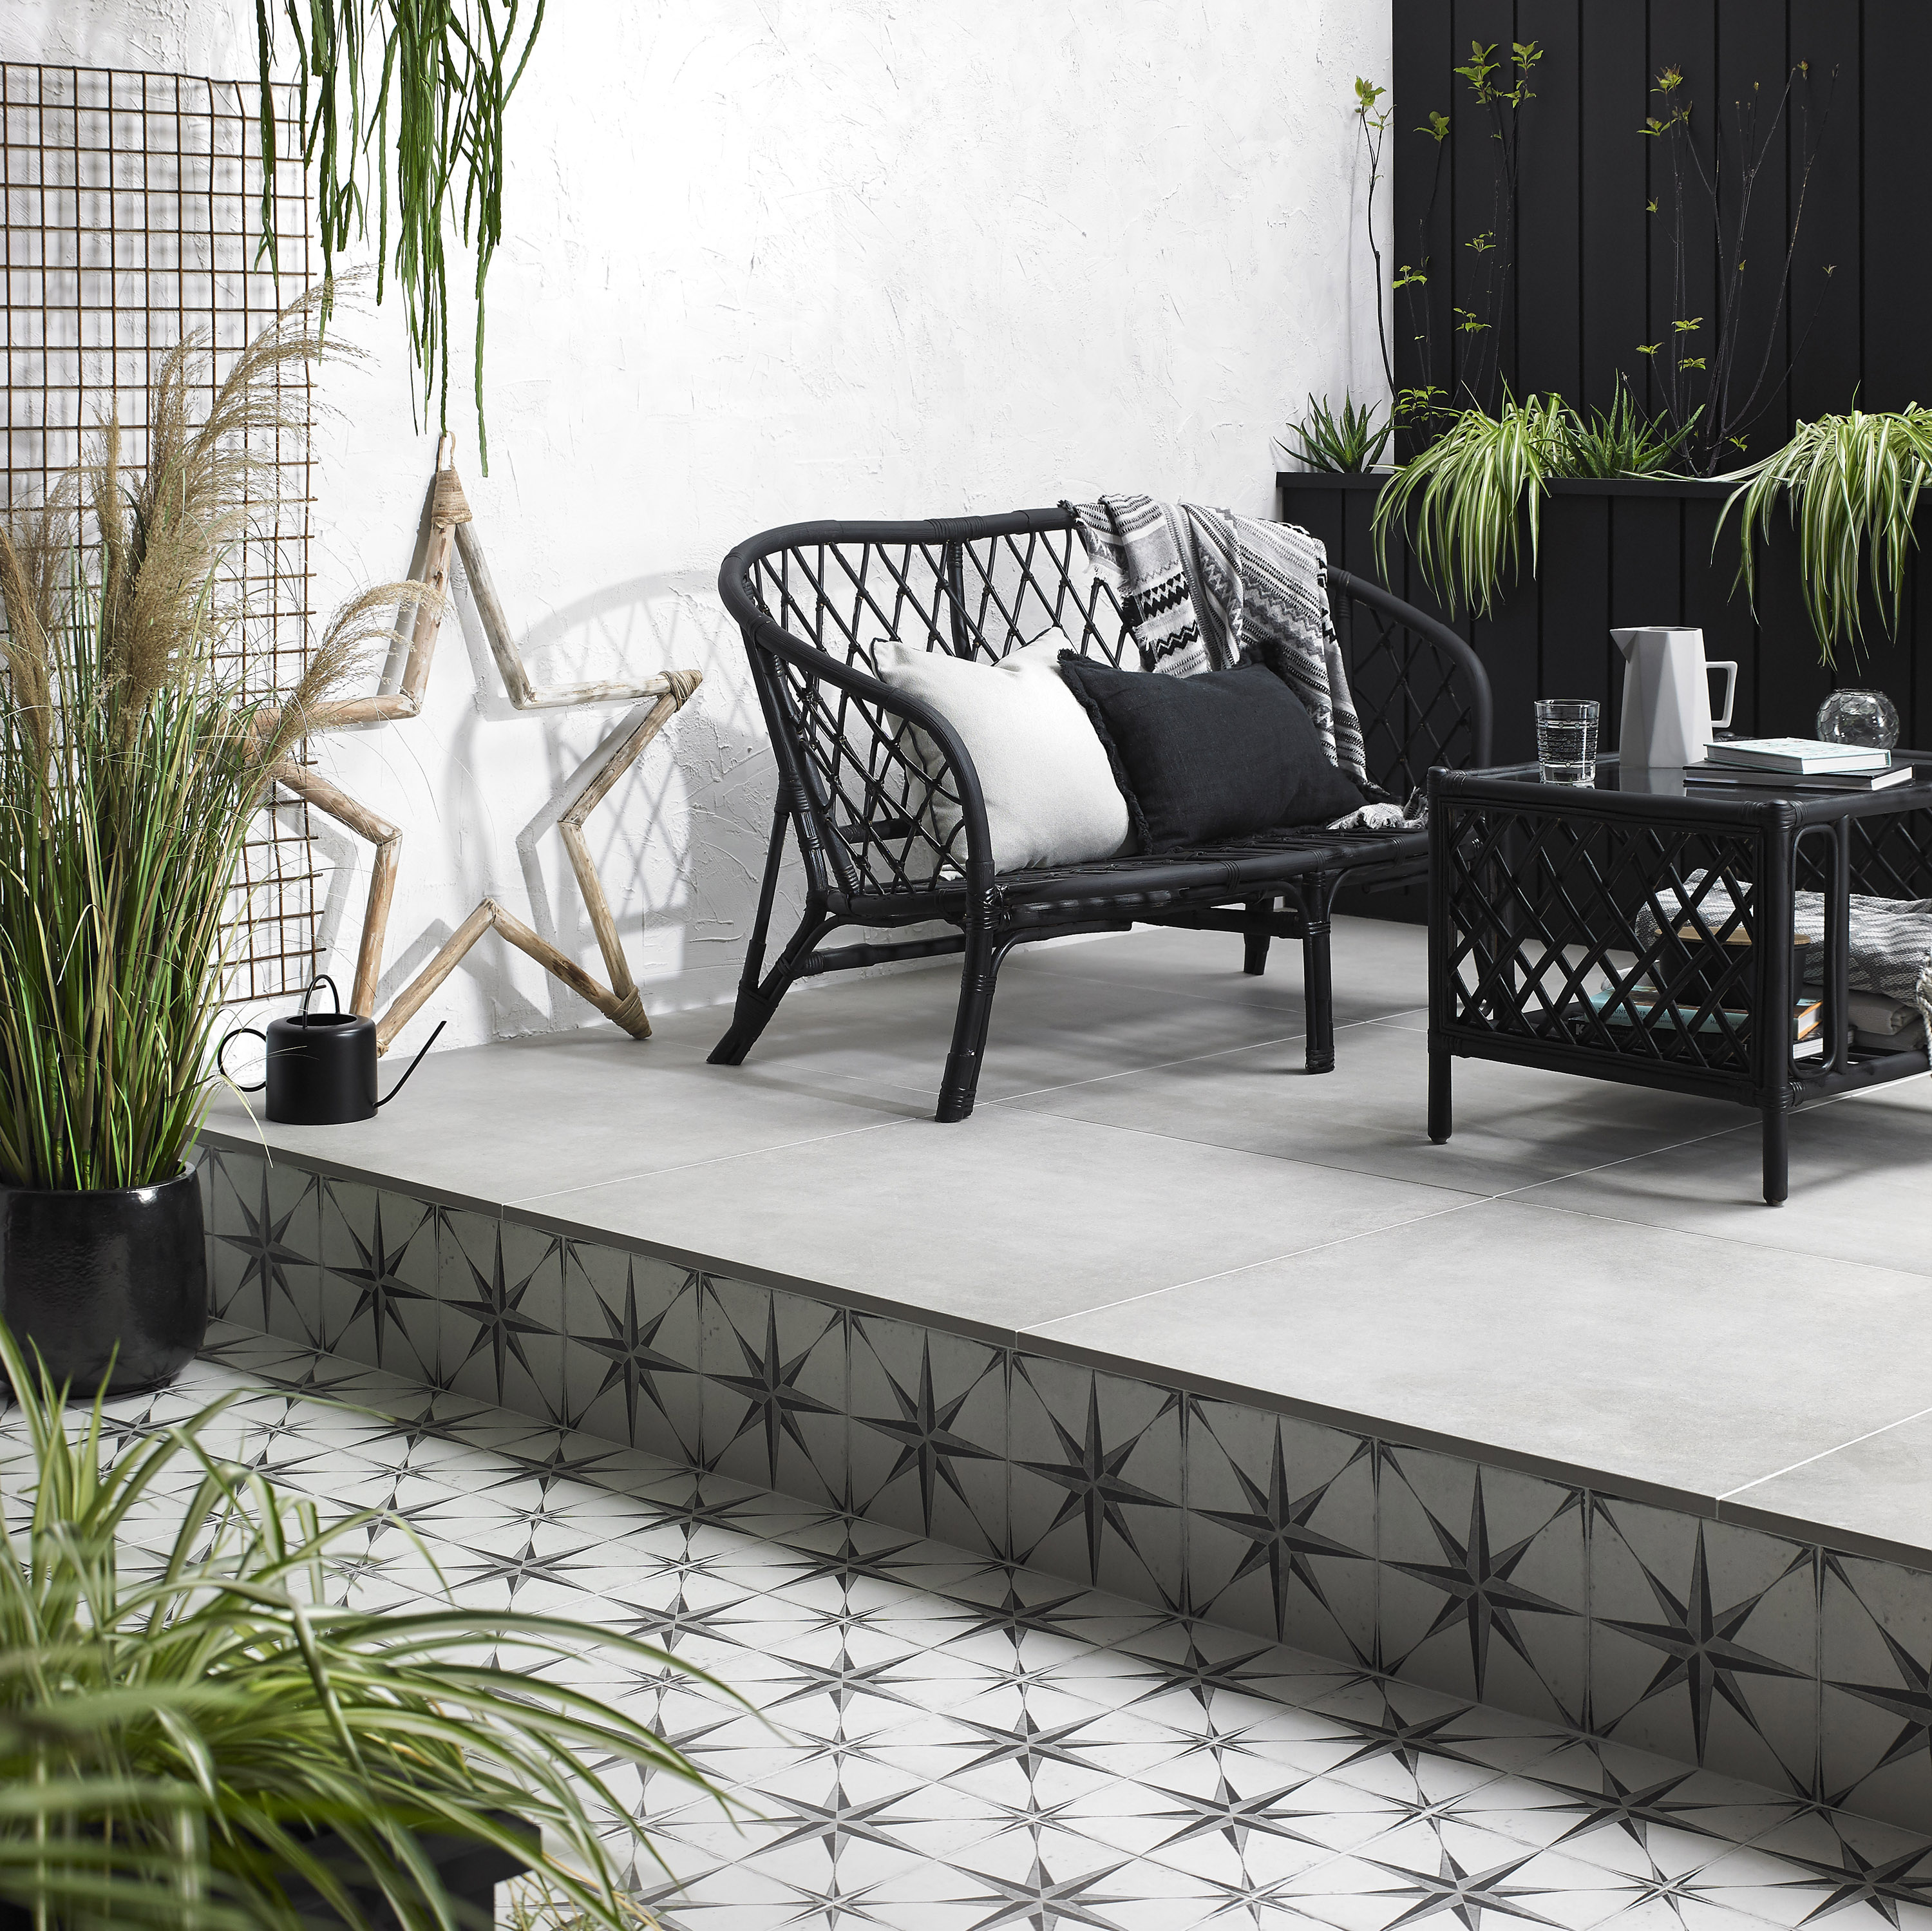 patterned floor tiles used on an outdoor patio